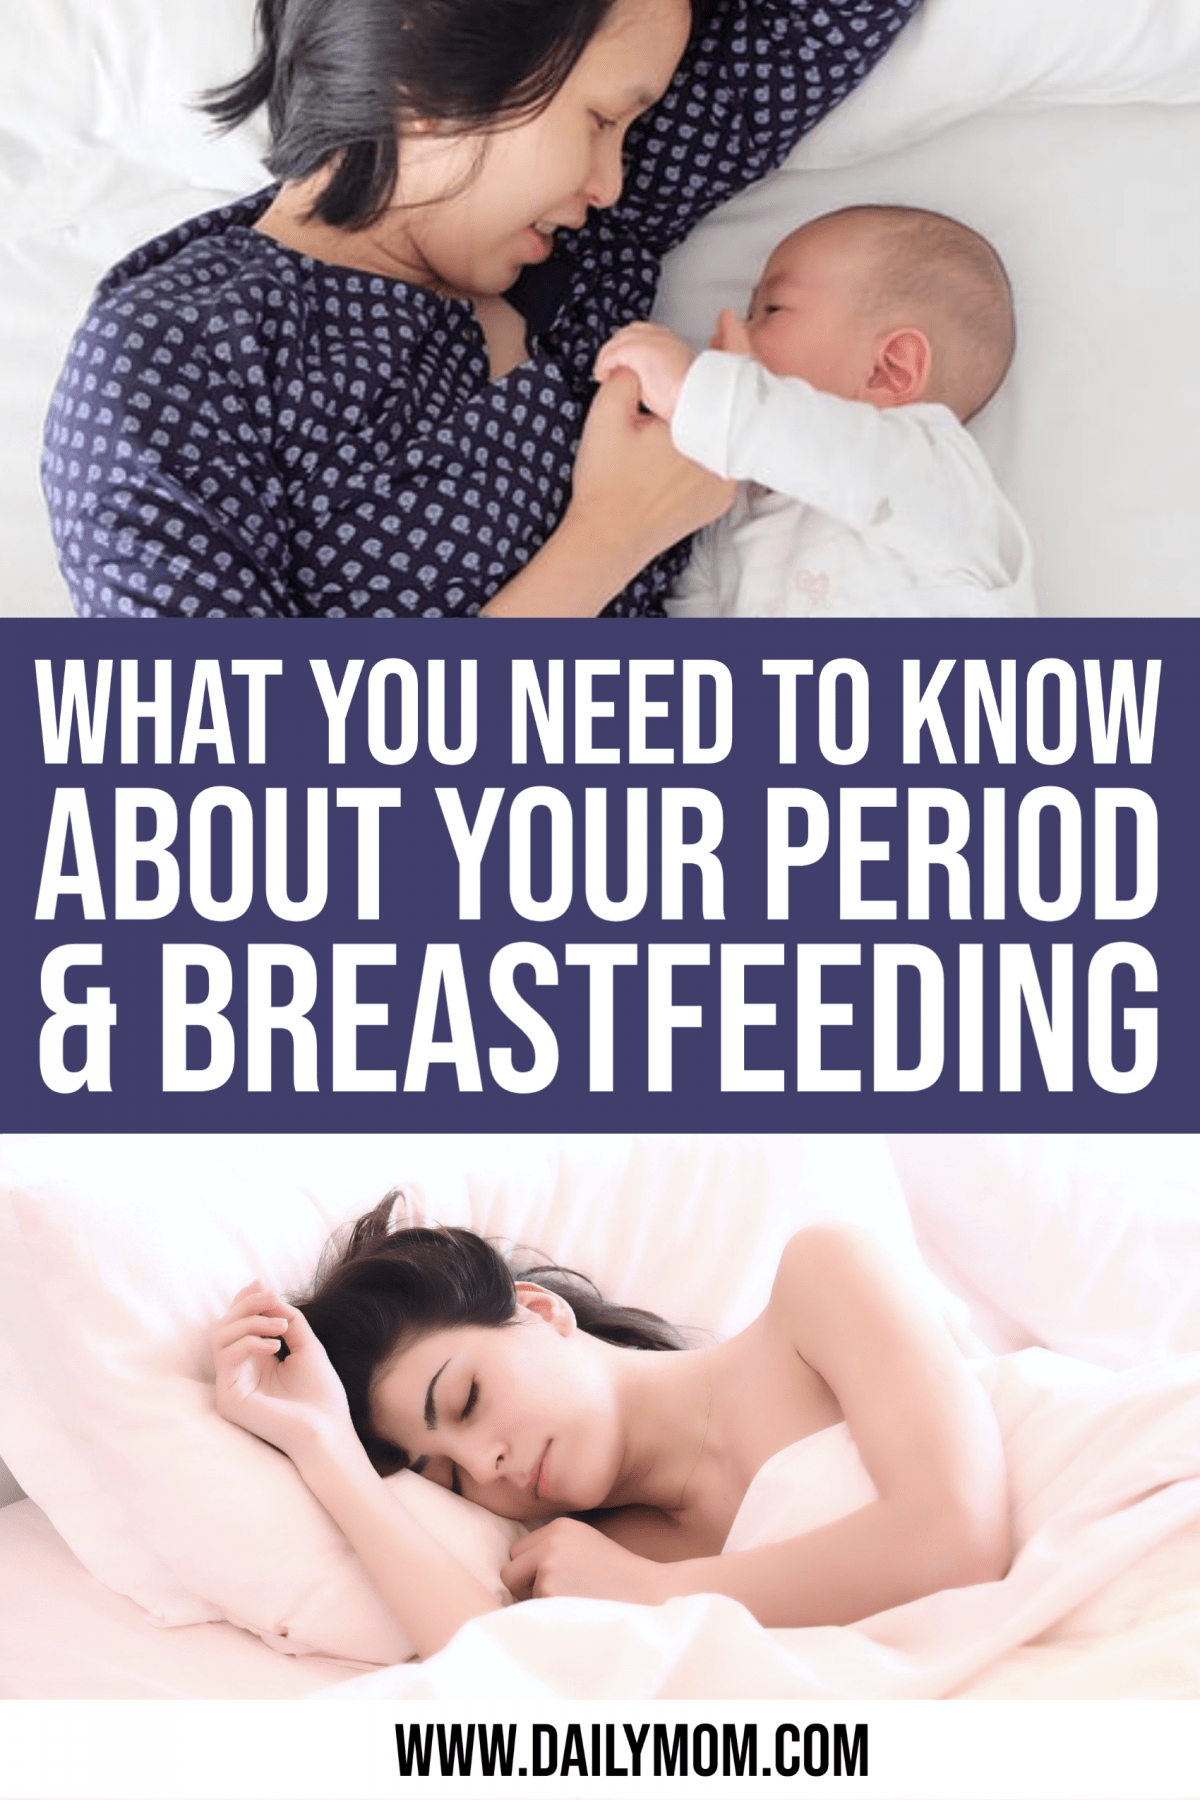 Facts About Your Period While Breastfeeding